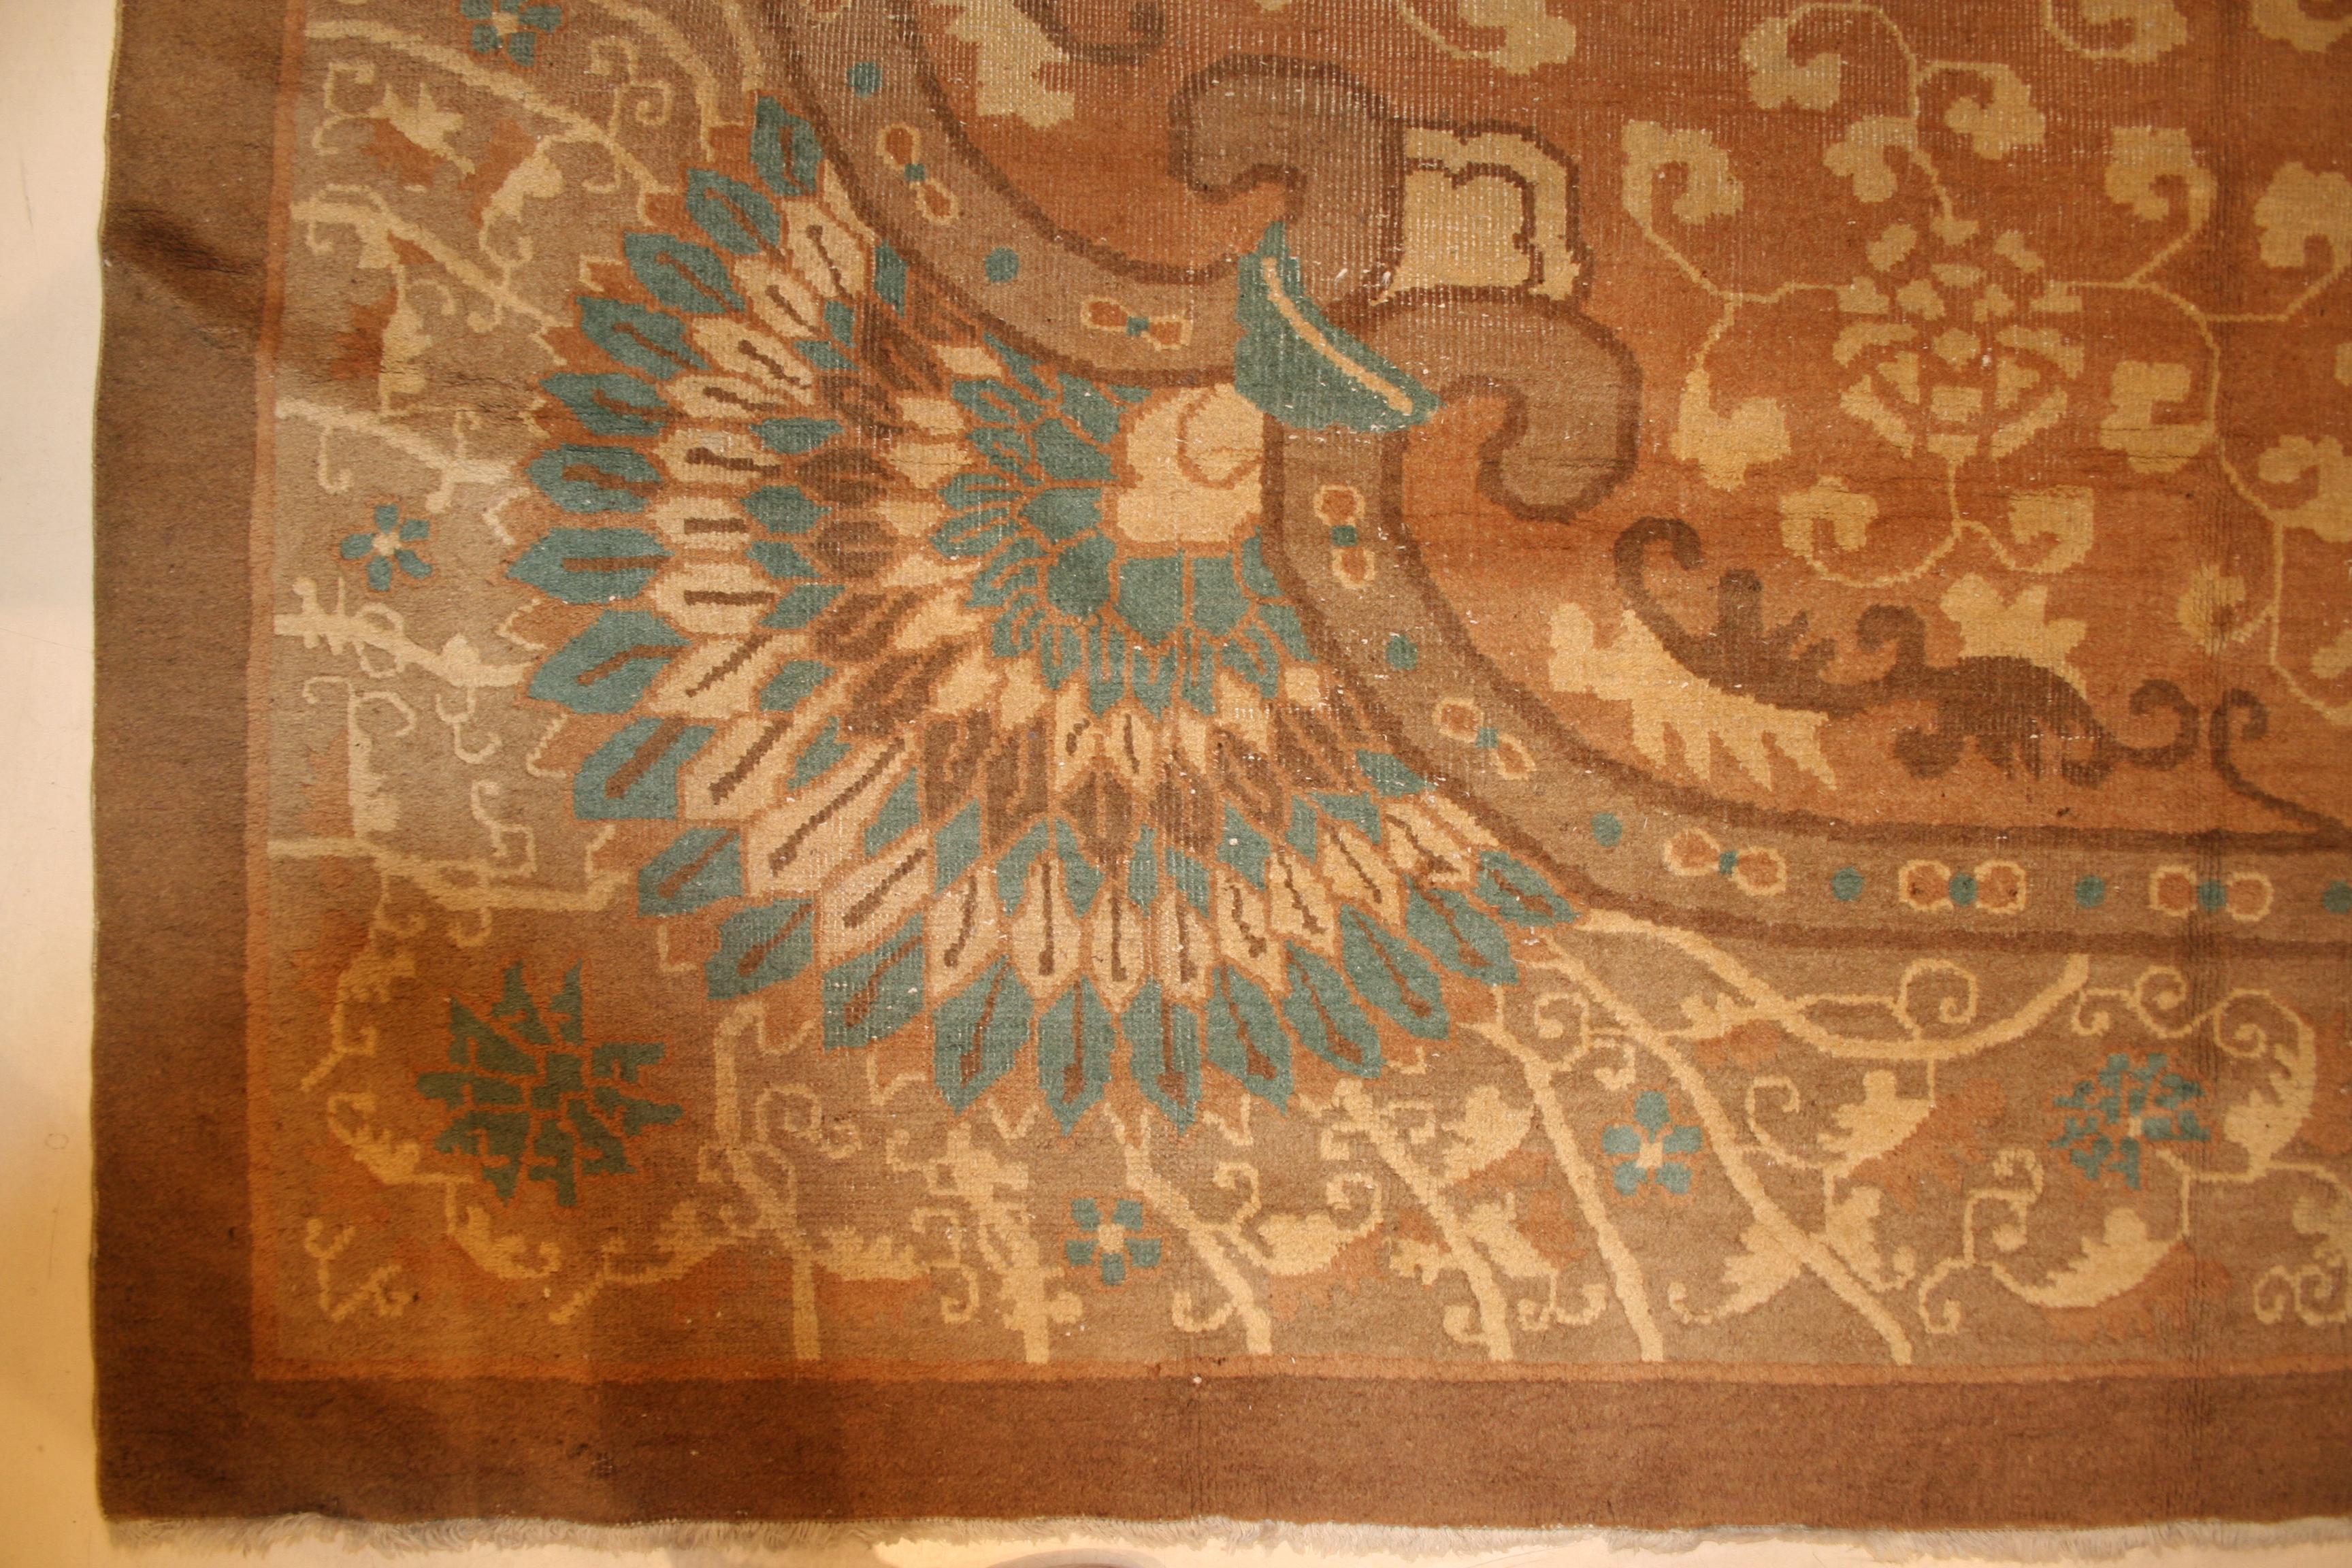 A rare and unusual Chinese carpet from the Art Nouveau period characterised by an all-over pattern of tone on tone lotus flowers scrolling on a soft cream background within a circular reserve. The corner elements derived from stylized peacocks are